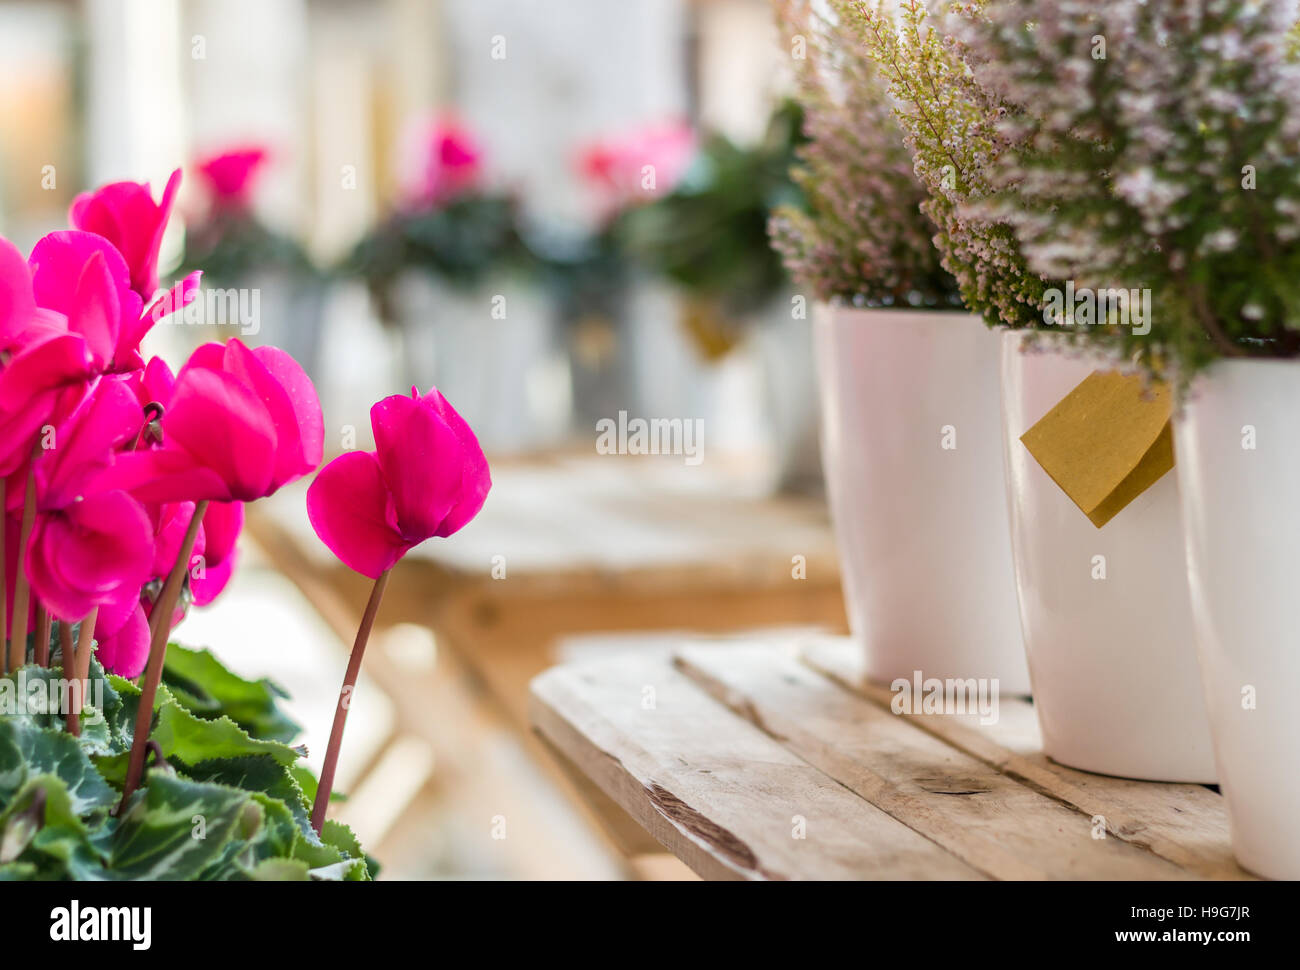 Pots with the planted bush of heather and pink flowers on a wooden table. Shallow depth of field. Defocused blurry background. Stock Photo